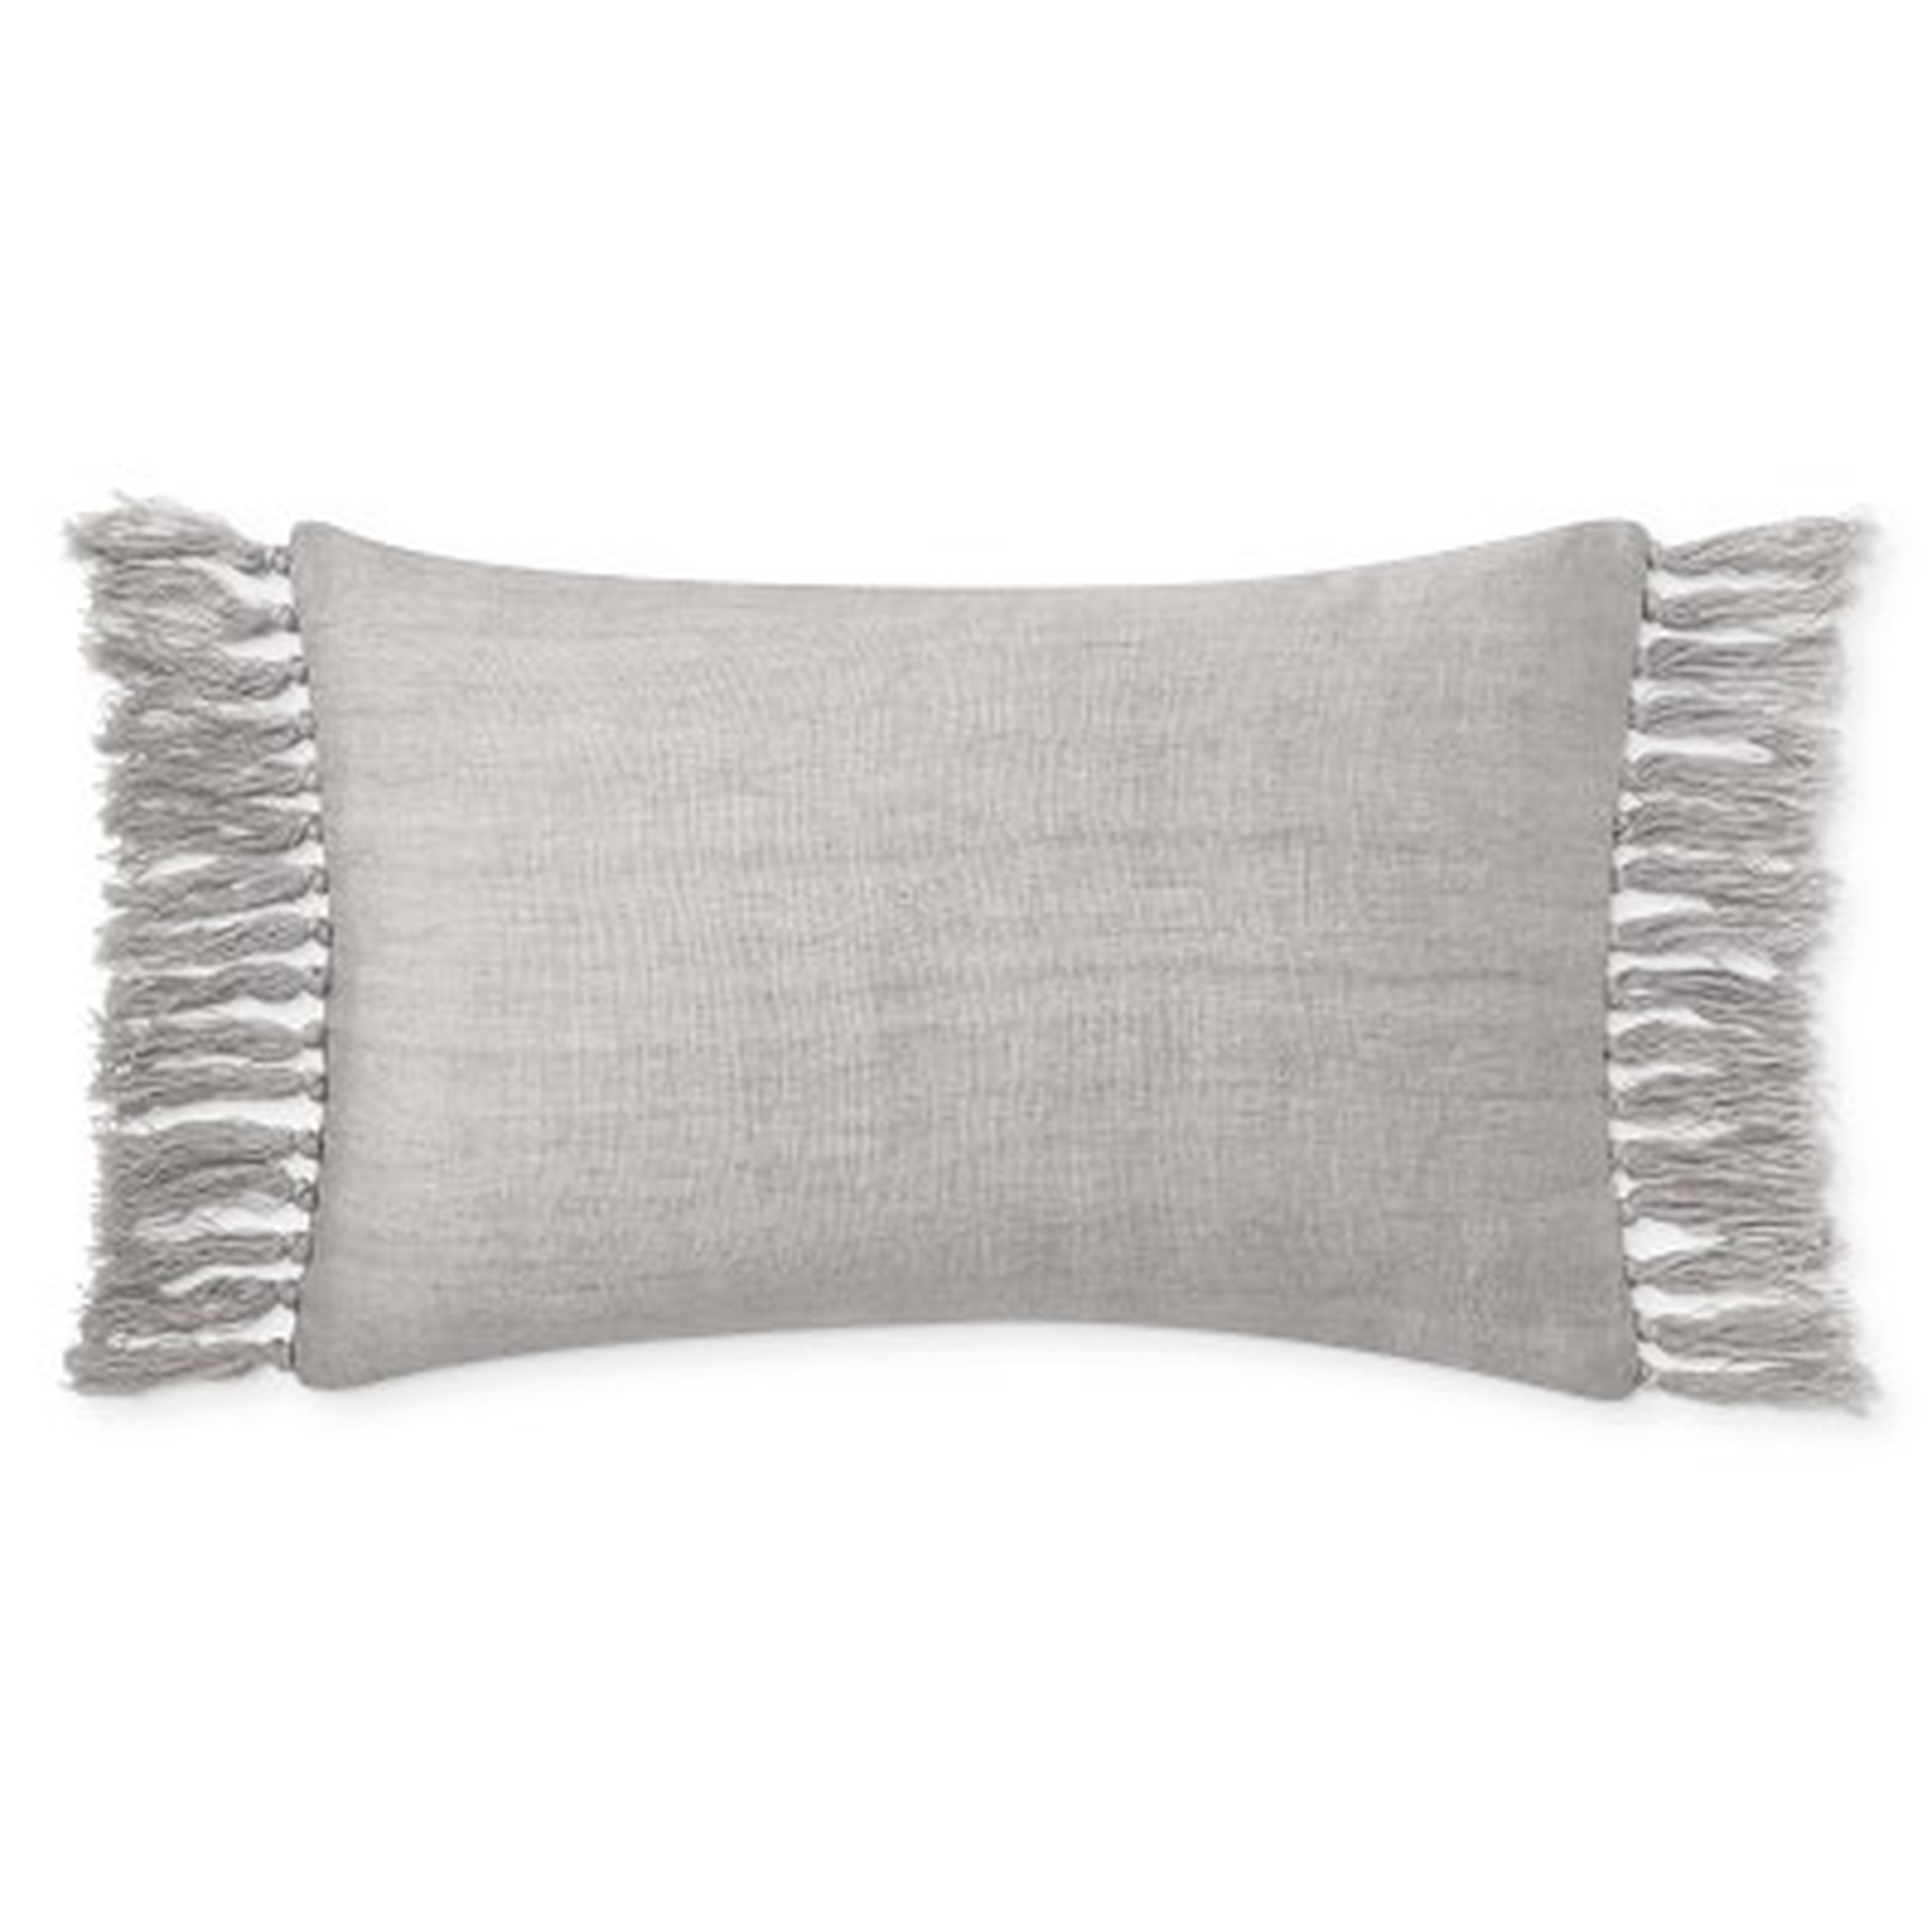 Knotted Fringe Linen Lumbar Pillow Cover, 14" X 22", Grey - Williams Sonoma